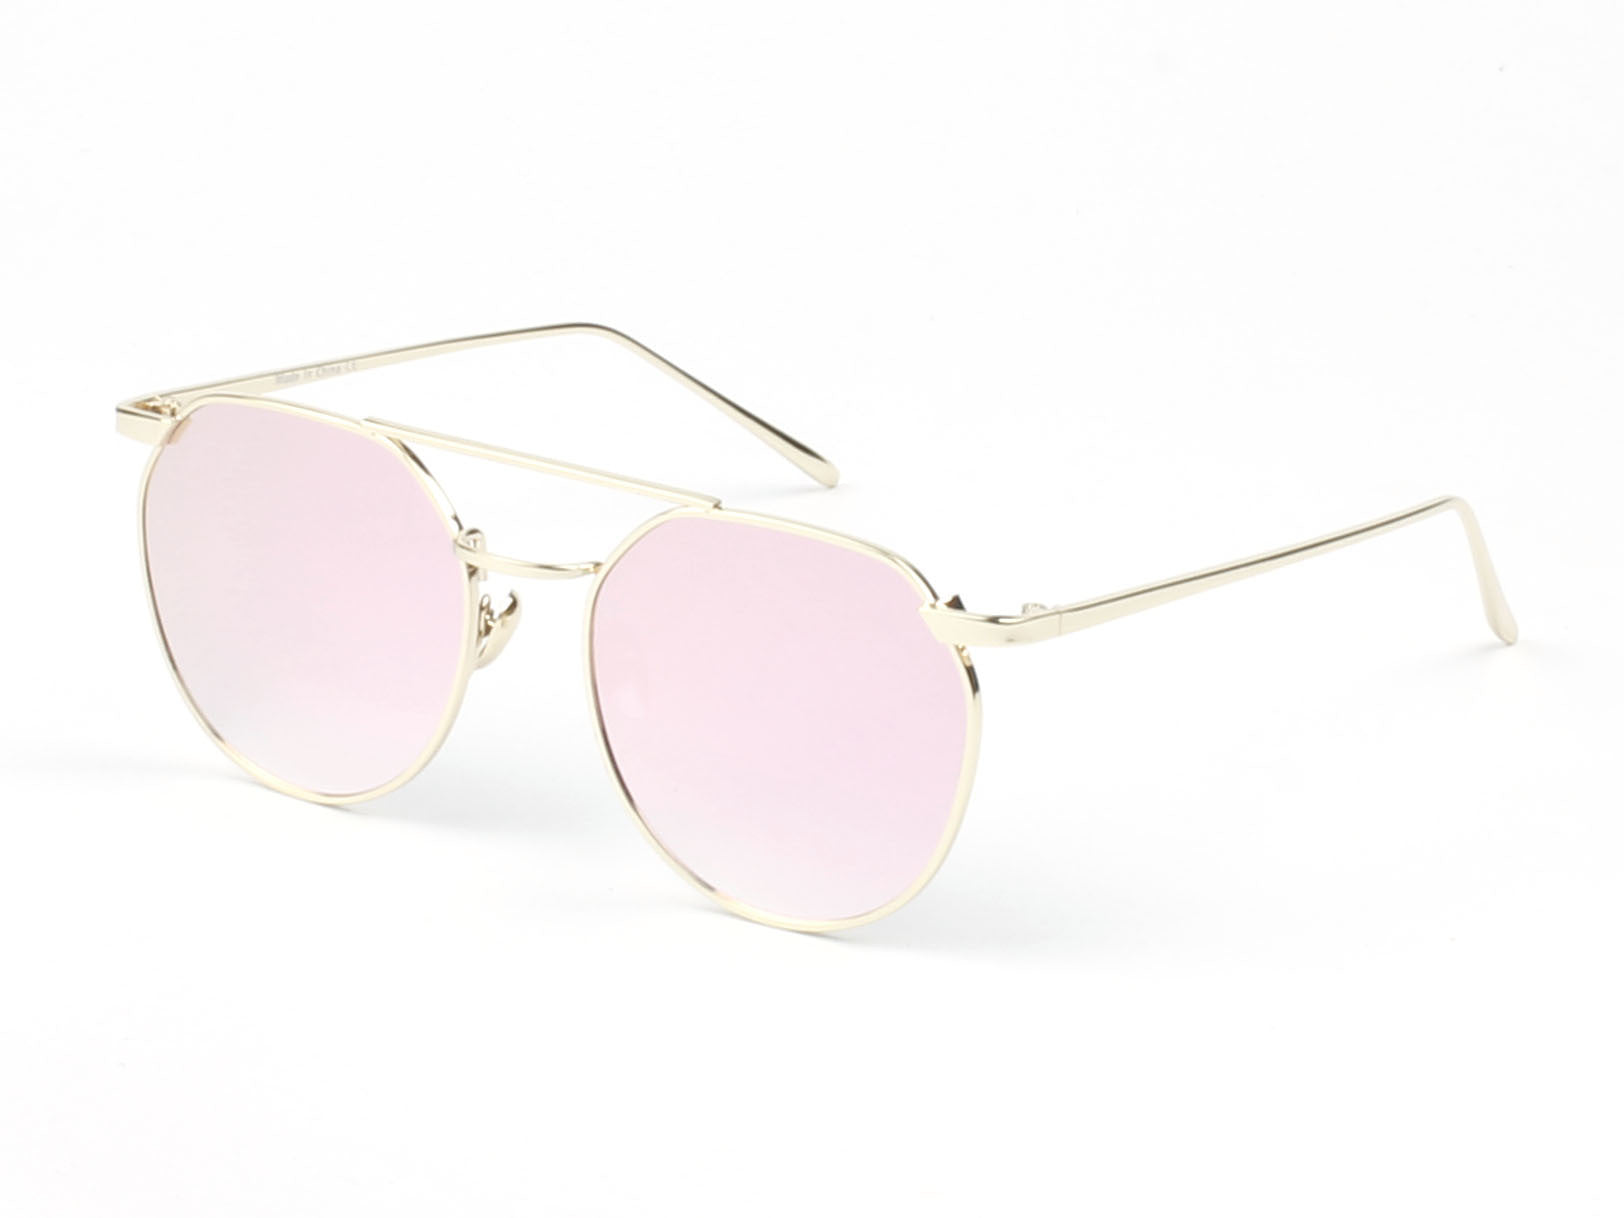 D63 - VINTAGE Round Mirrored Flat Lens Sunglasses Pink